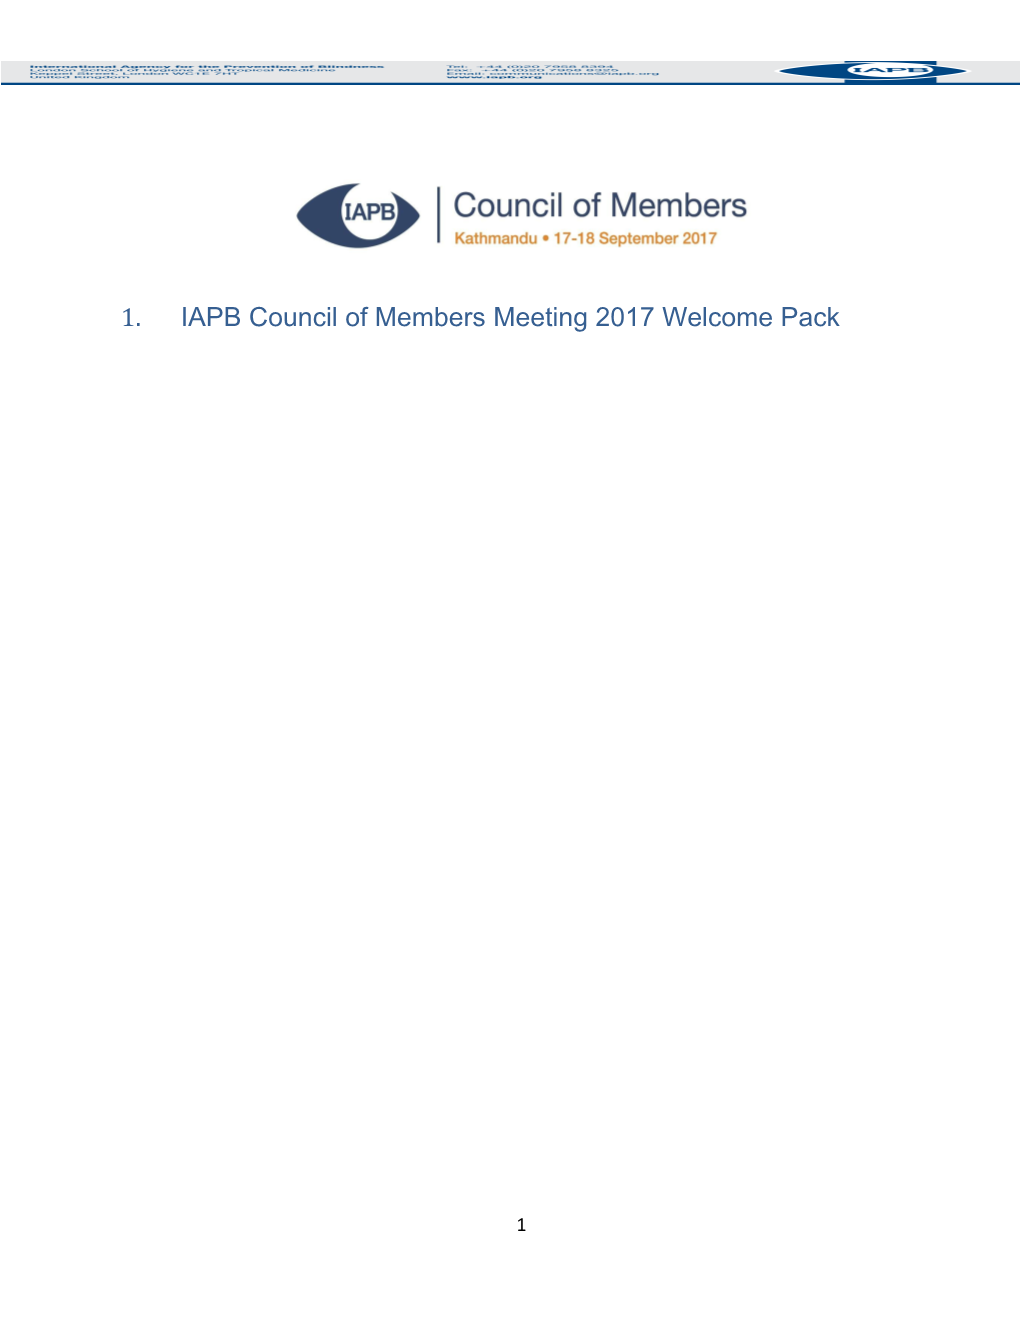 IAPB Council of Members Meeting 2017 Welcome Pack